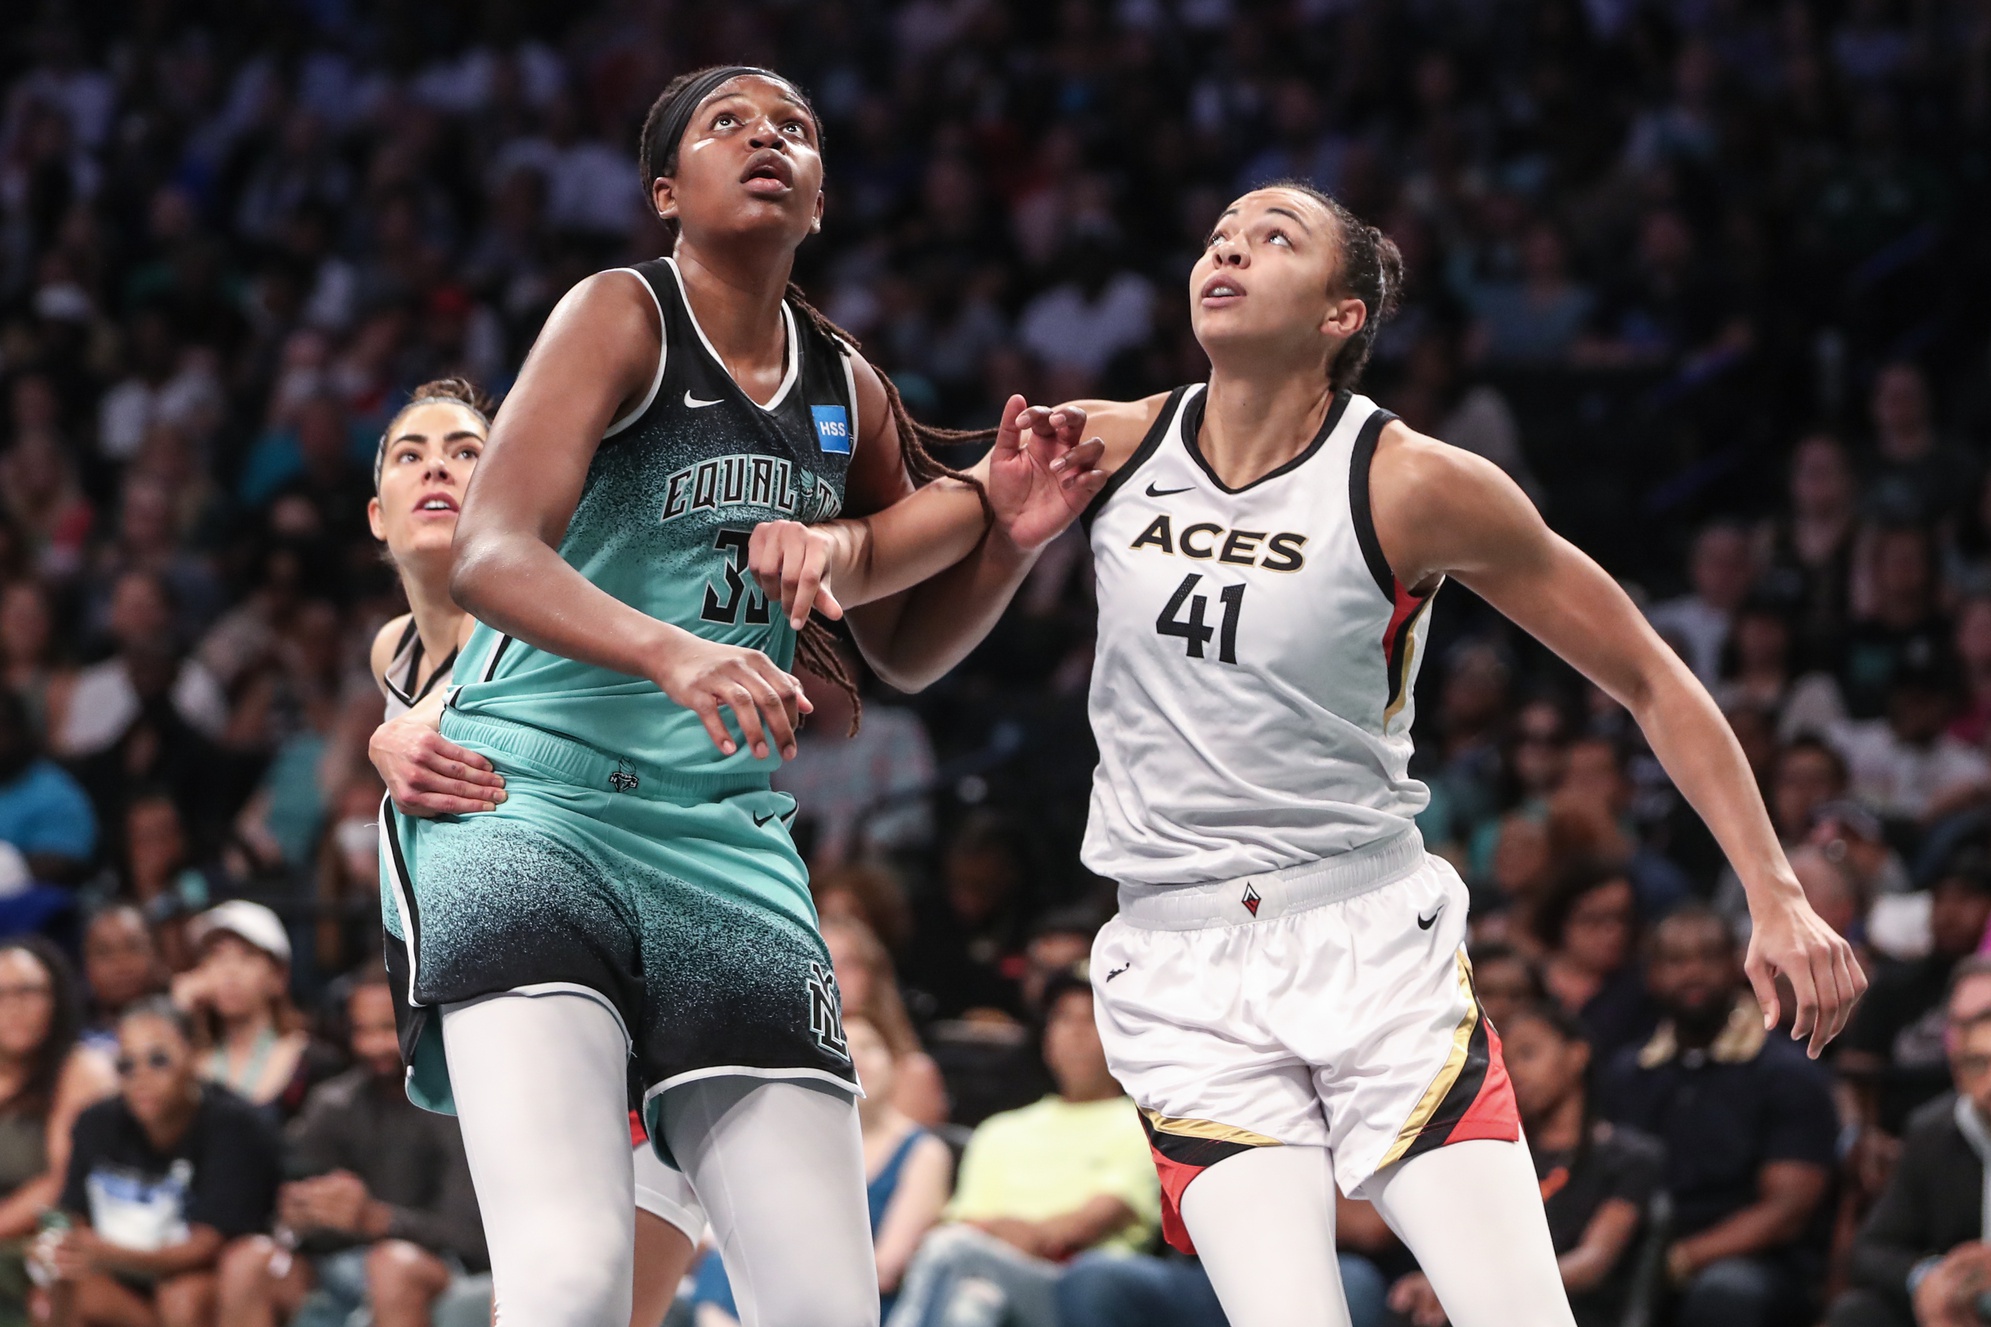 Aug 6, 2023; Brooklyn, New York, USA; New York Liberty forward Jonquel Jones (35) and Las Vegas Aces center Kiah Stokes (41) box out for a rebound in the first quarter at Barclays Center. Mandatory Credit: Wendell Cruz-USA TODAY Sports. Here is a WNBA Final Preview